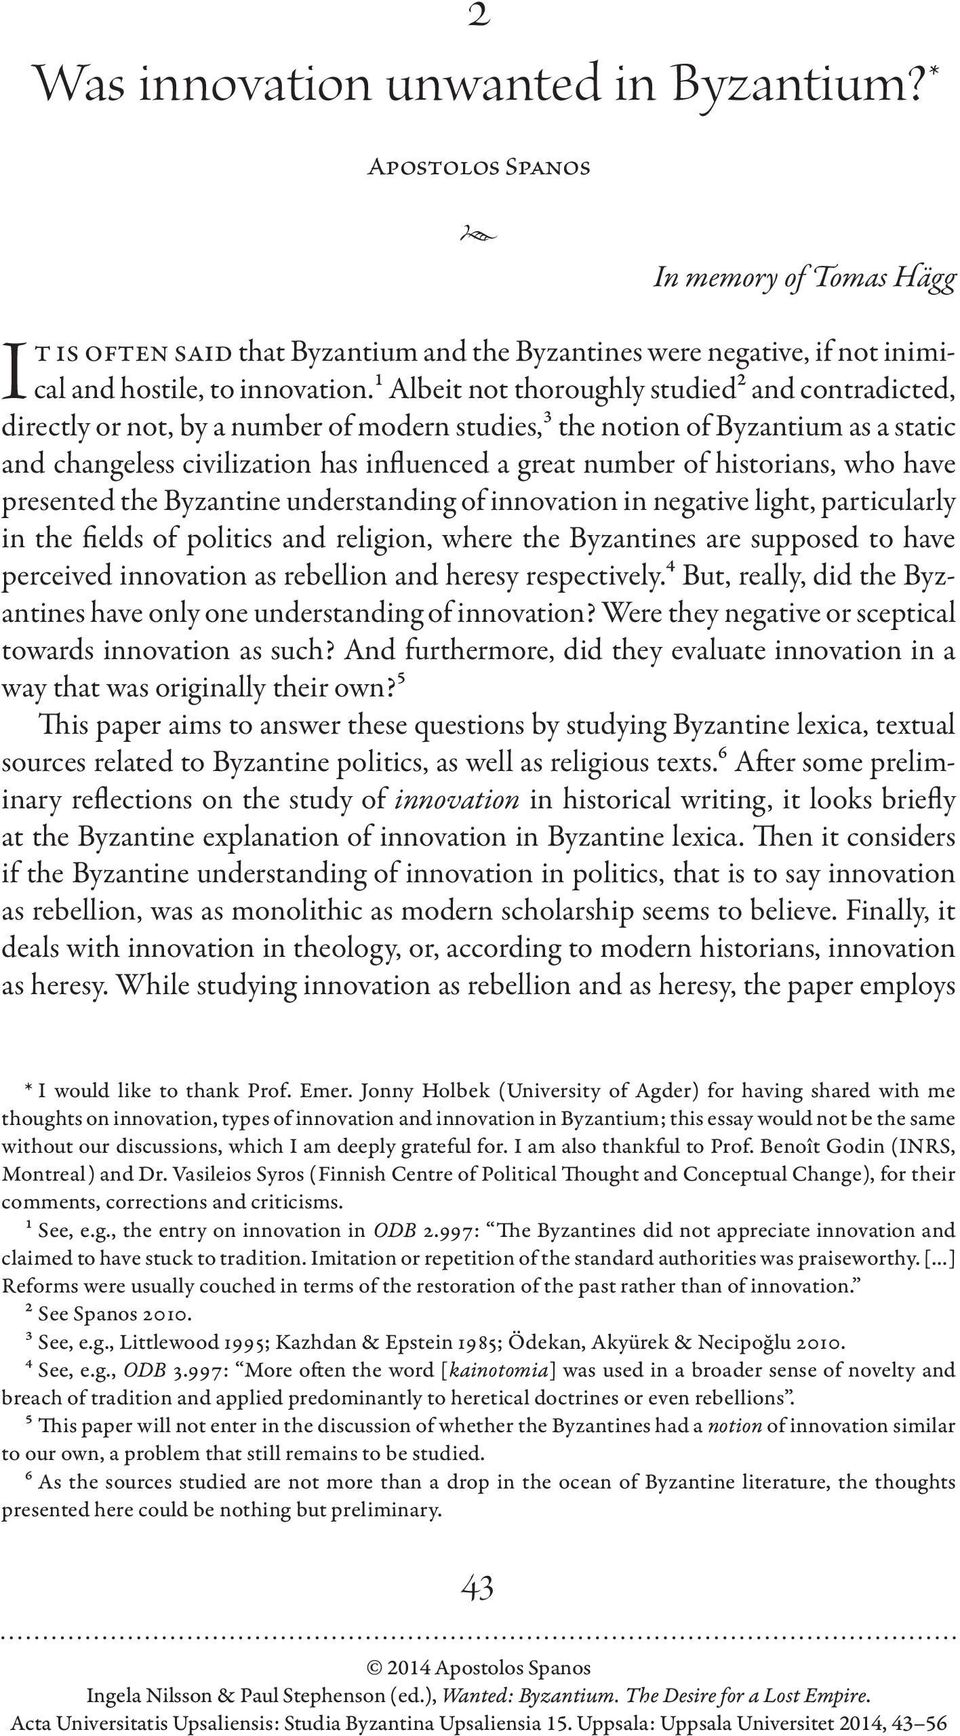 historians, who have presented the Byzantine understanding of innovation in negative light, particularly in the fields of politics and religion, where the Byzantines are supposed to have perceived